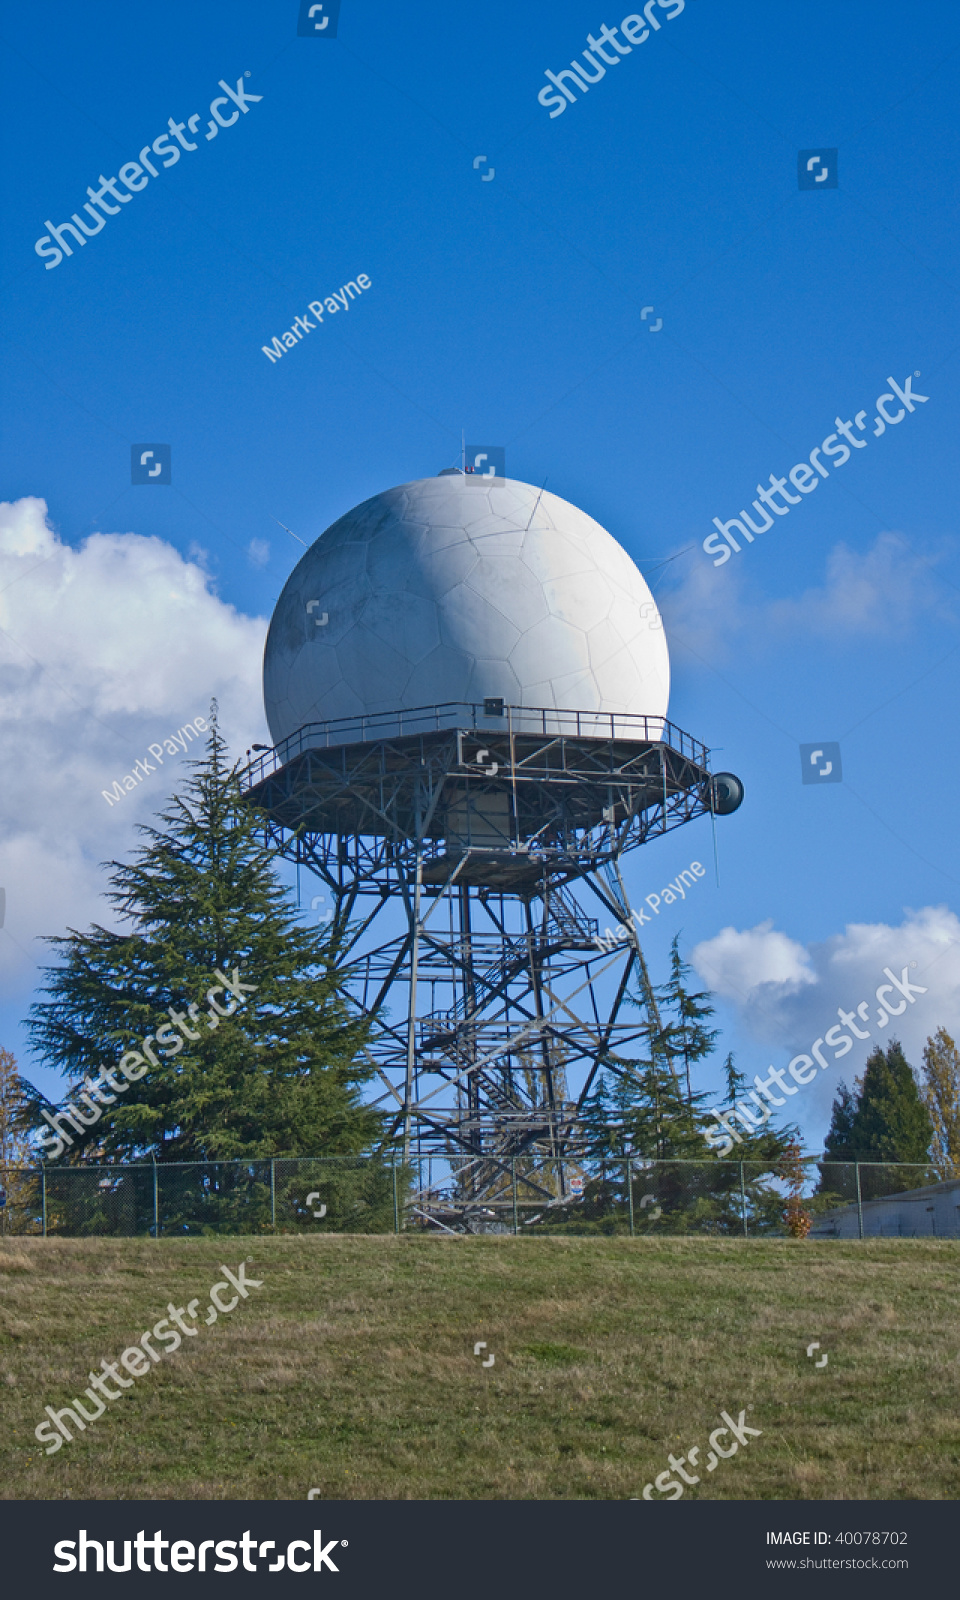 Weather Radar Structure In The Magnolia Community In Washington State